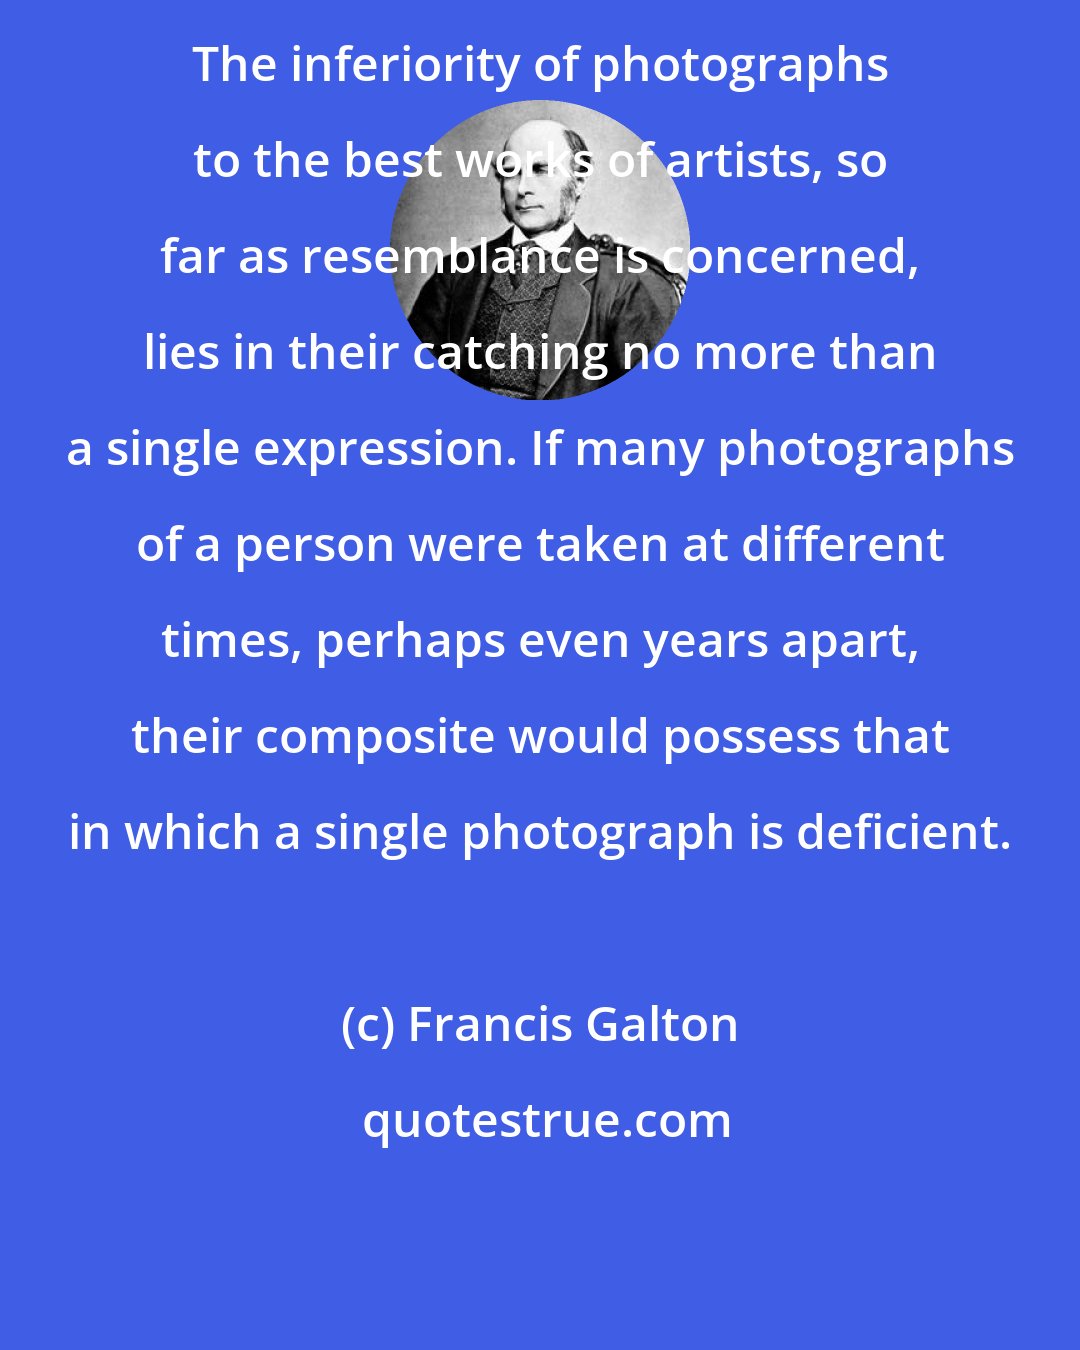 Francis Galton: The inferiority of photographs to the best works of artists, so far as resemblance is concerned, lies in their catching no more than a single expression. If many photographs of a person were taken at different times, perhaps even years apart, their composite would possess that in which a single photograph is deficient.